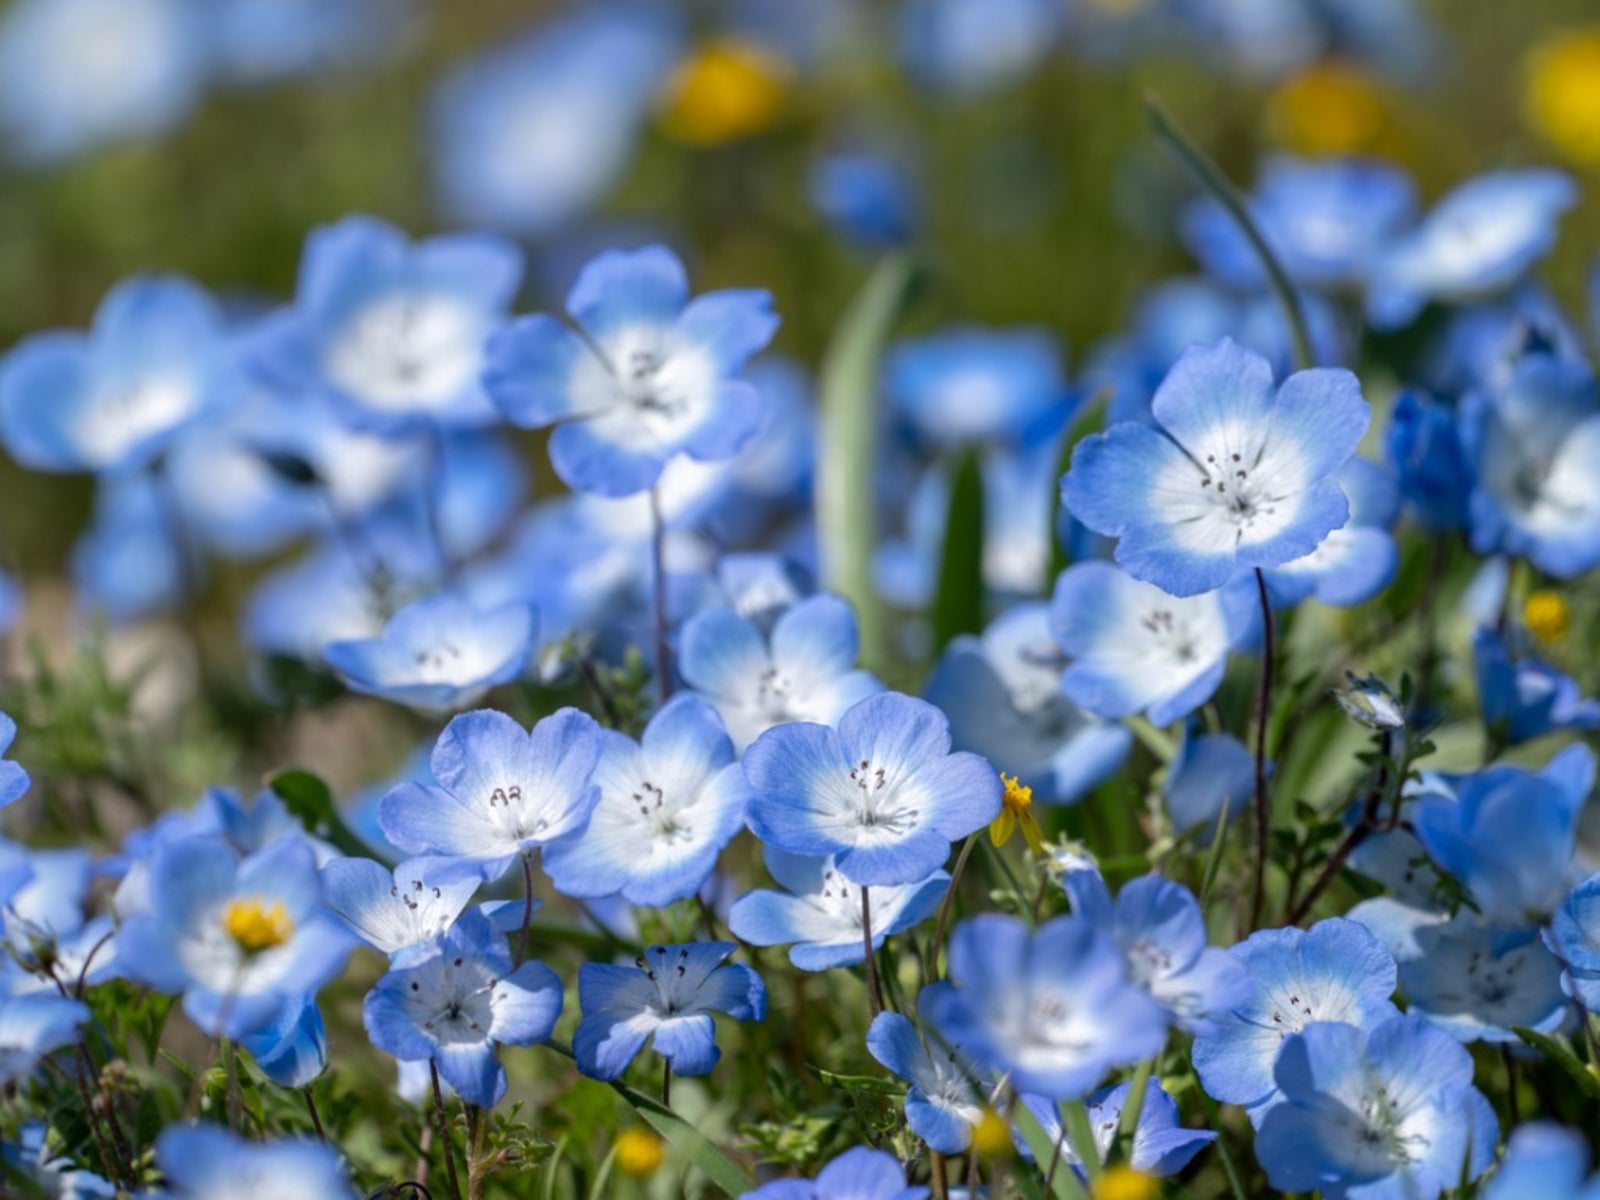 Baby Blue Eyes Flower Information: How To Grow Baby Blue Eyes